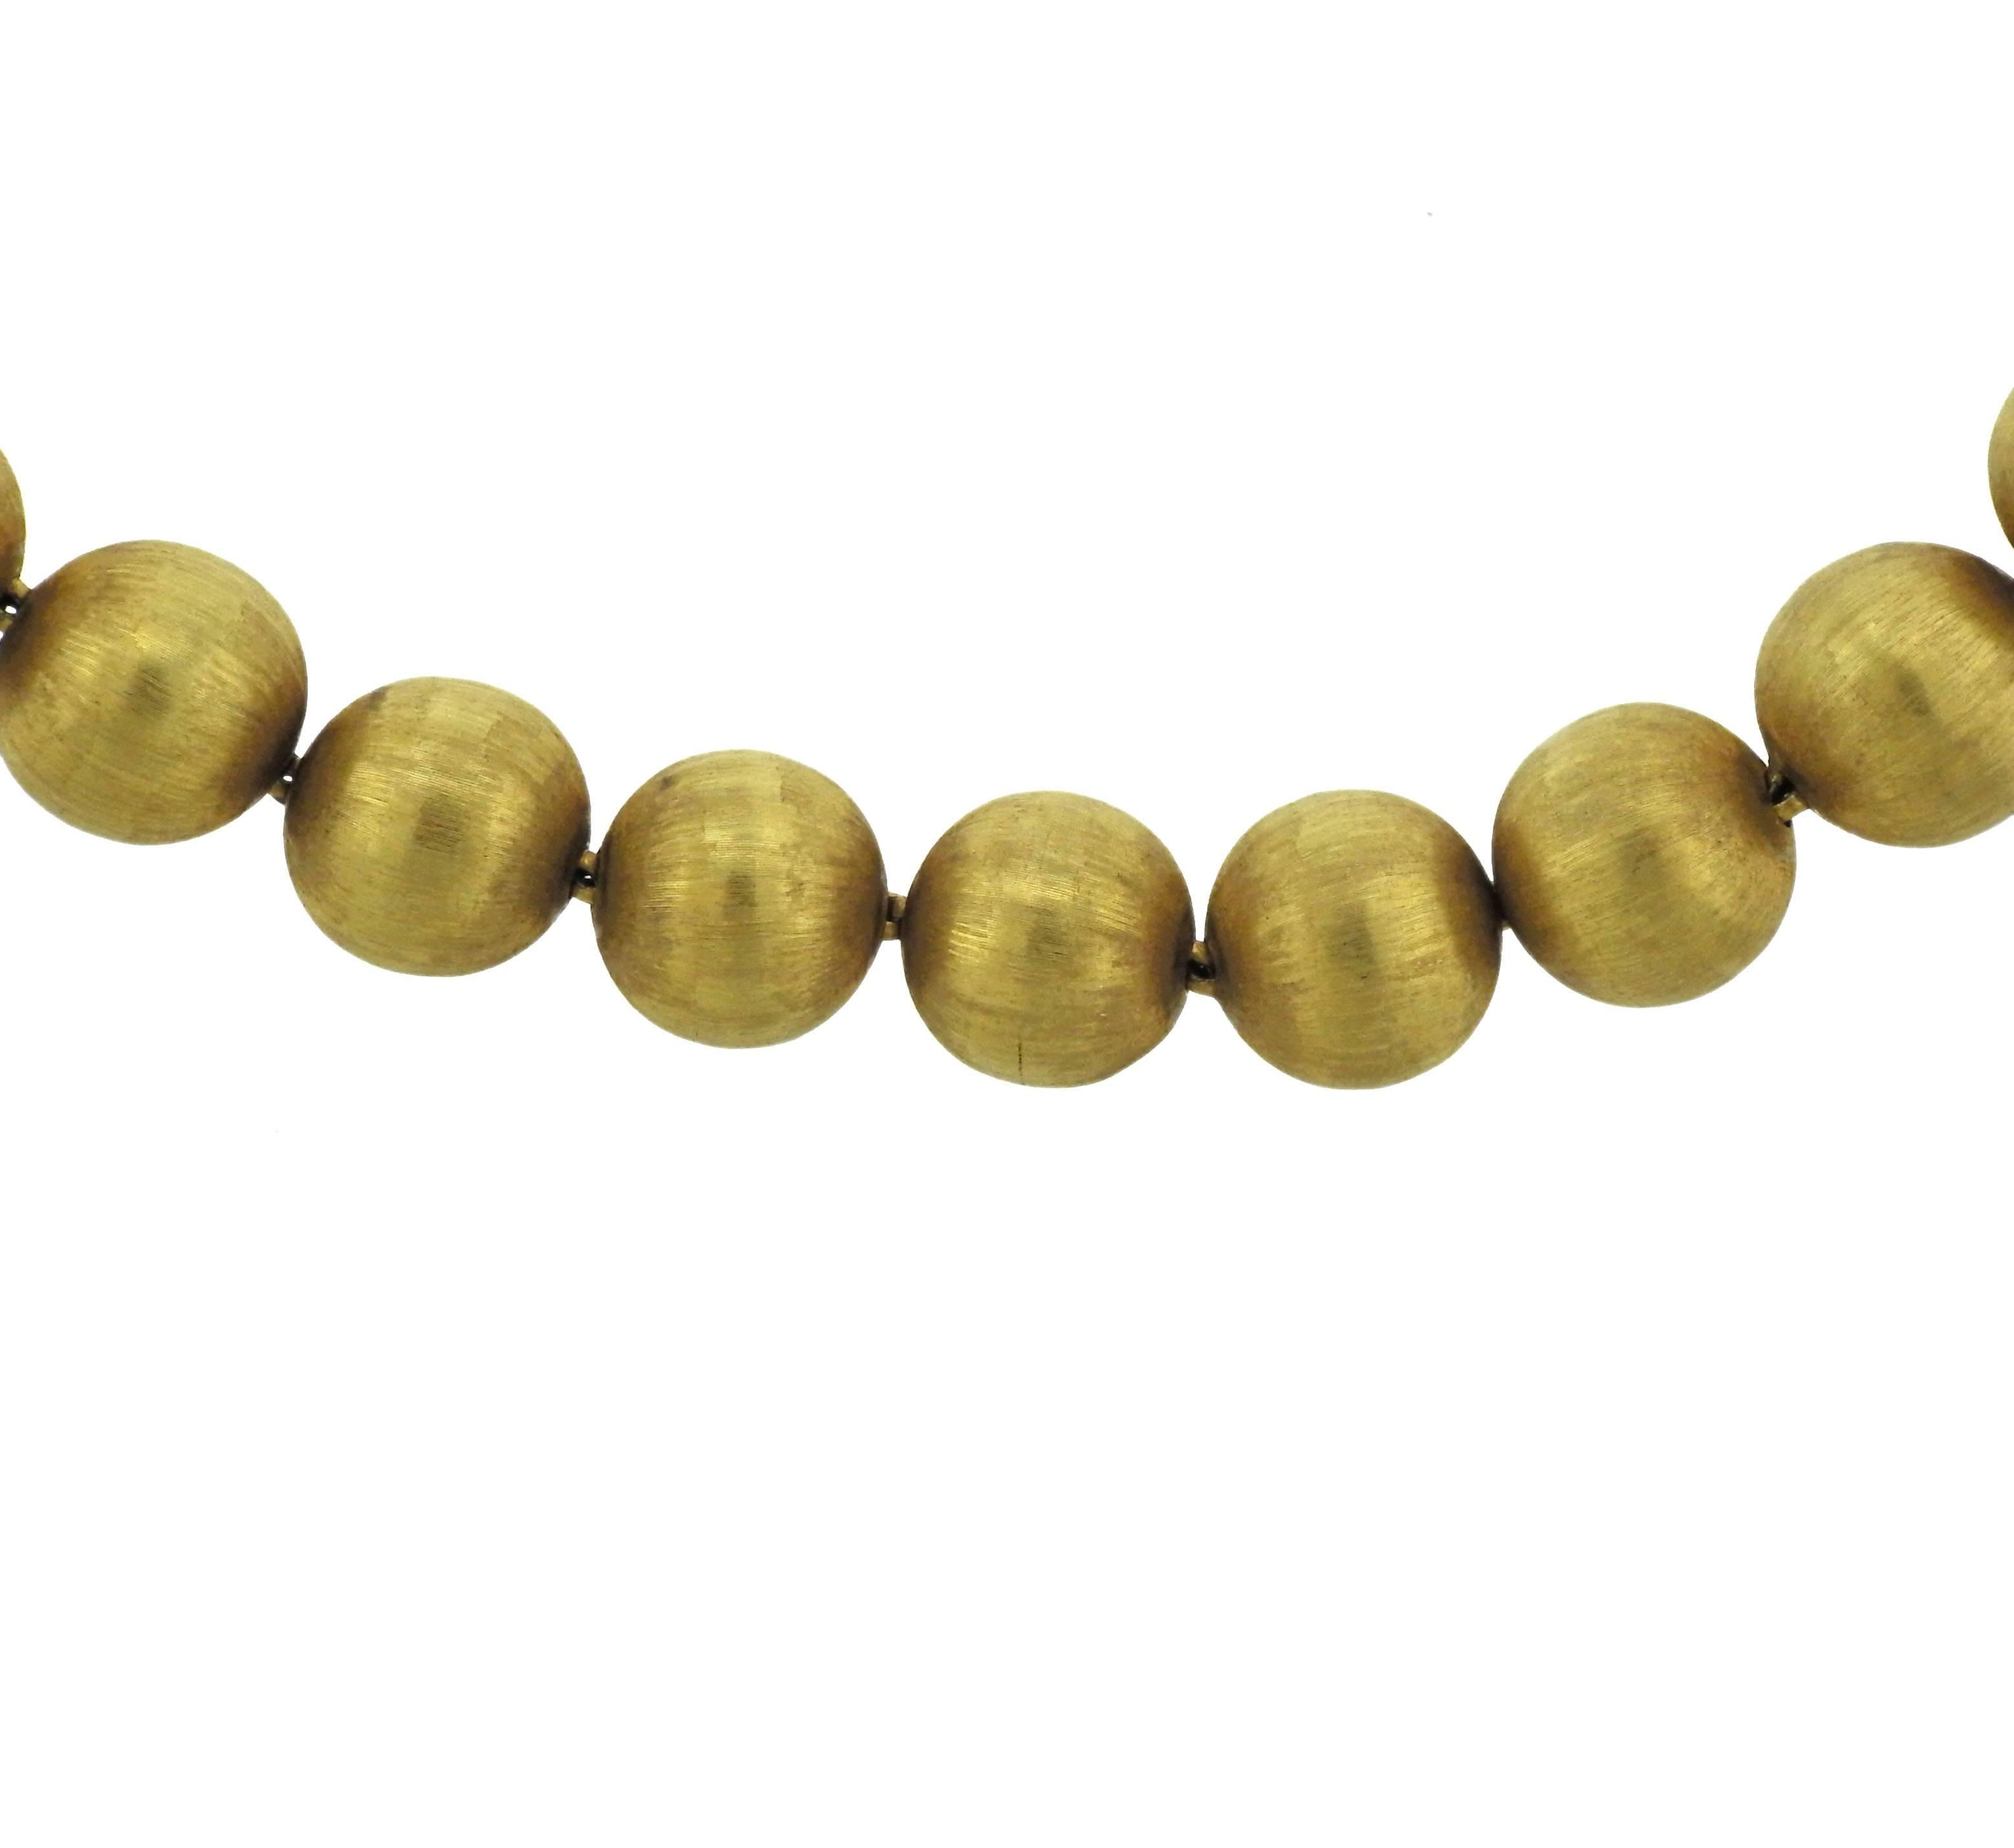  18k yellow gold bead necklace, crafted by Buccellati. Necklace is 16.75